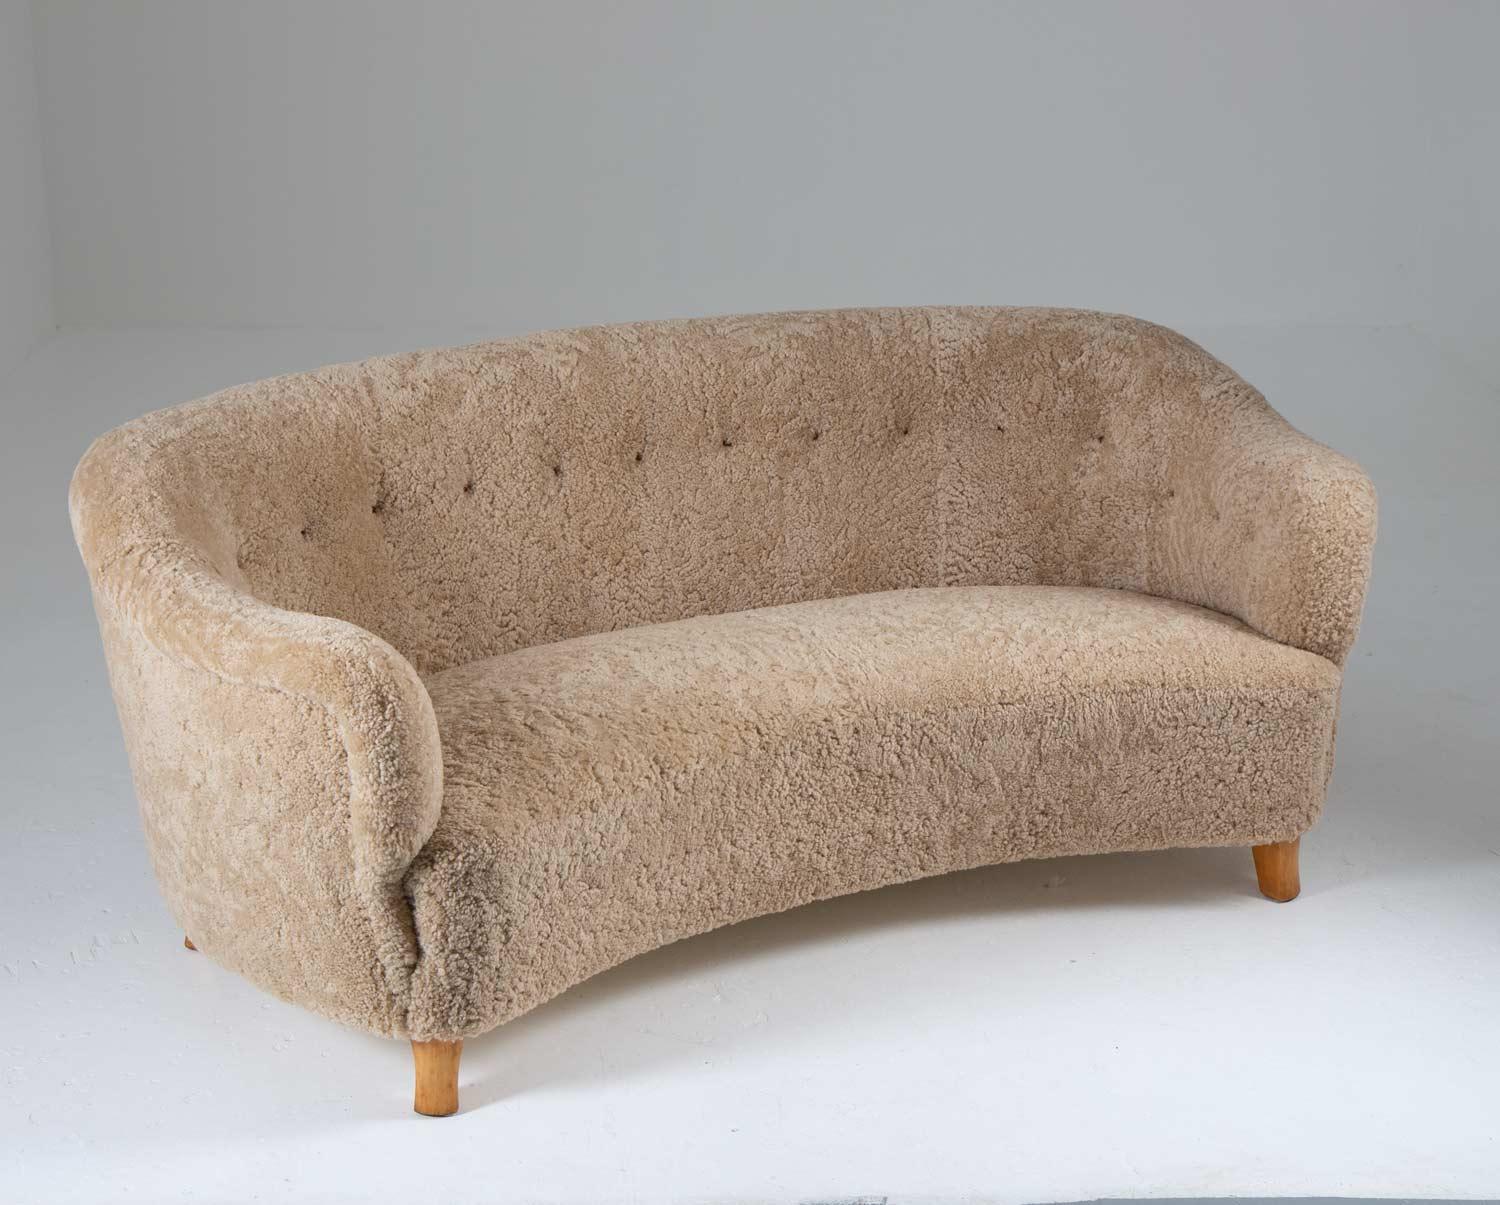 Curved 3-seater sofa attributed to Otto Schulz for Boet, Sweden.
High-quality sofa with organic lines, just as comfortable as it is beautiful. 
The sofa has been reupholstered in ivory-colored sheepskin and cognac leather buttons.

Condition: